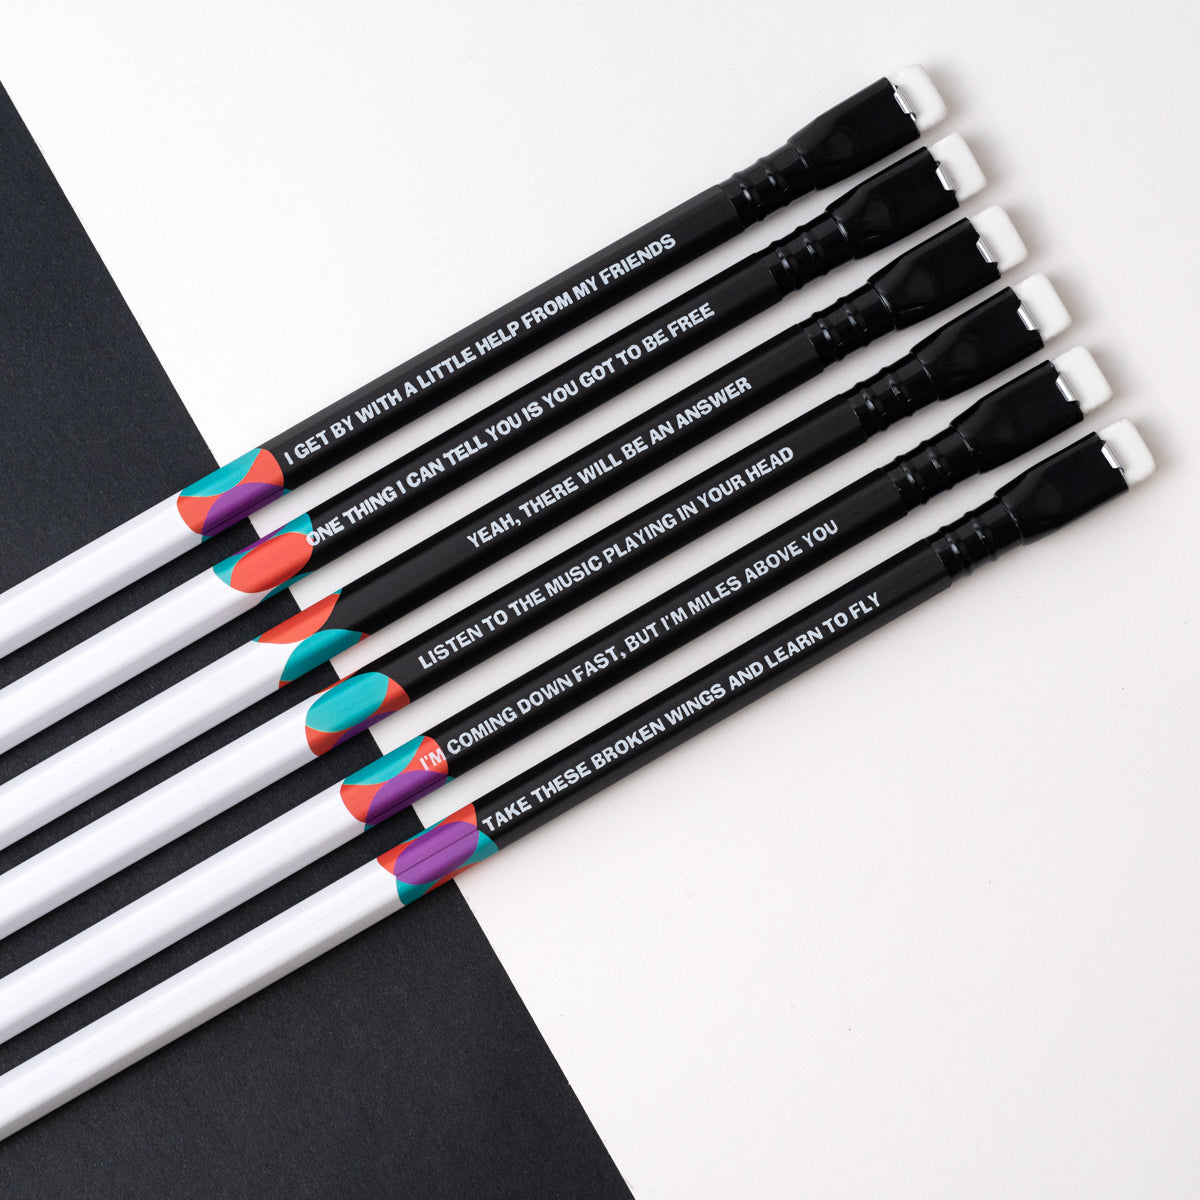 A collection of Blackwing Volume 192 (Set of 12) pencils with writing on them, inspired by the legendary songwriting duo of Lennon and McCartney.